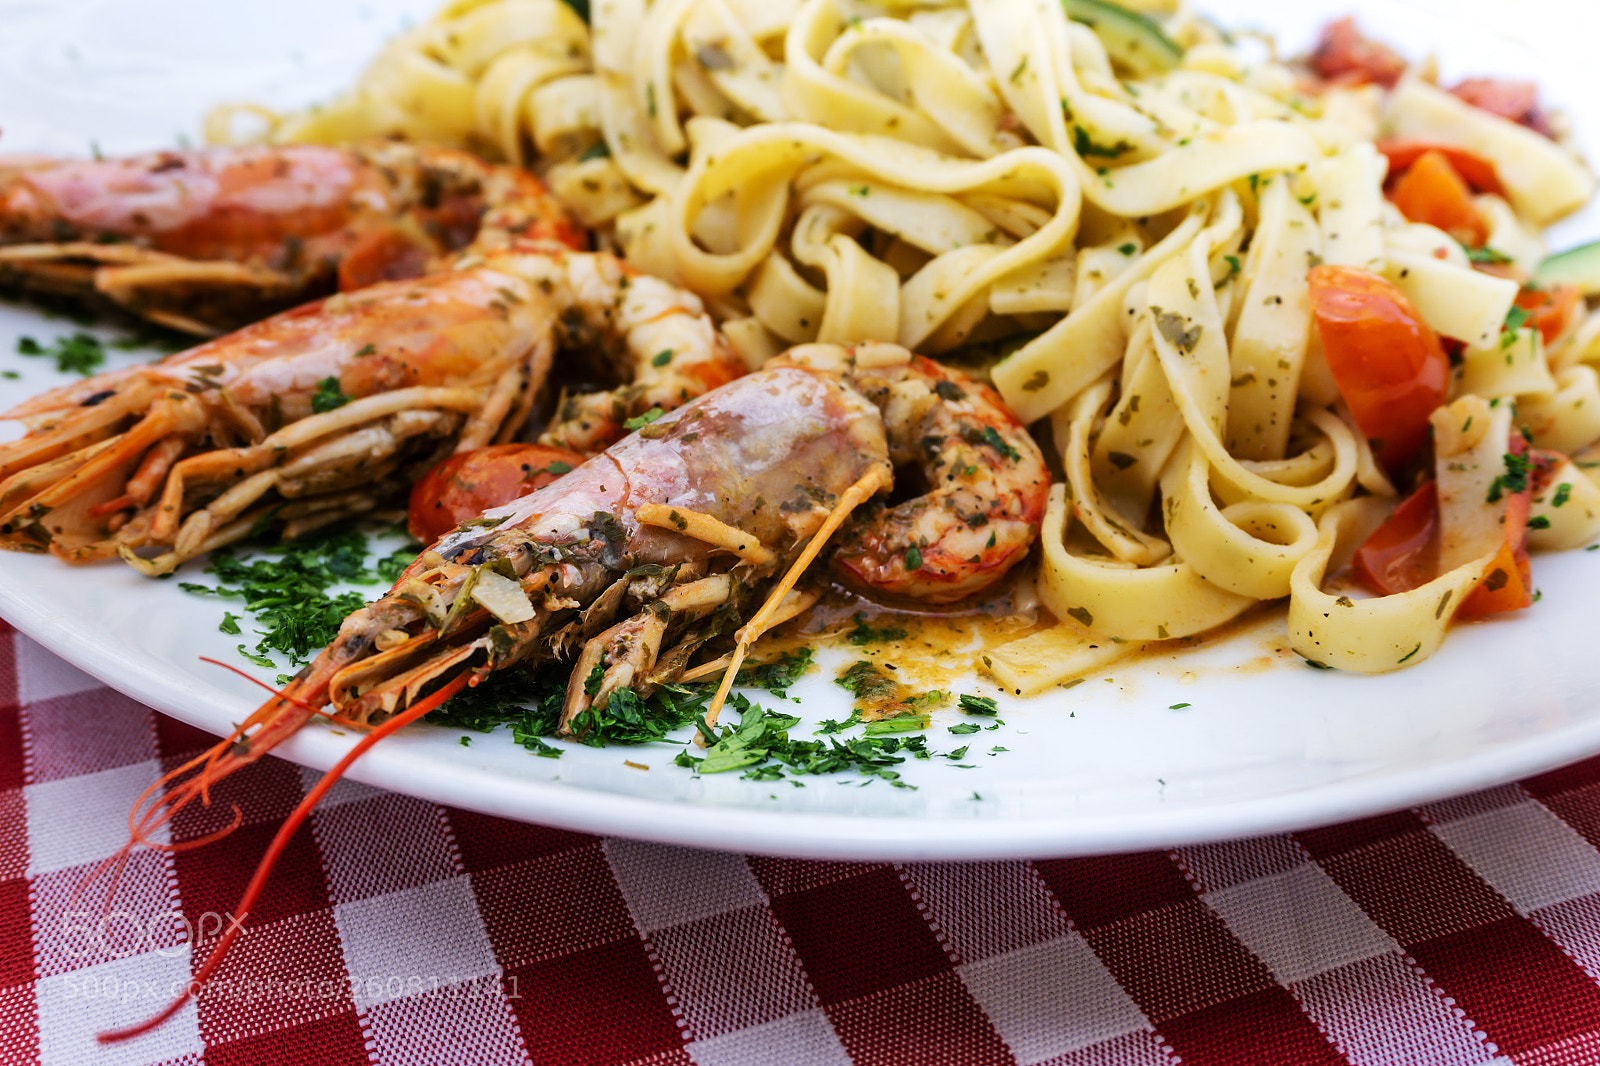 Sony a6000 sample photo. Pasta with shrimp dinner photography